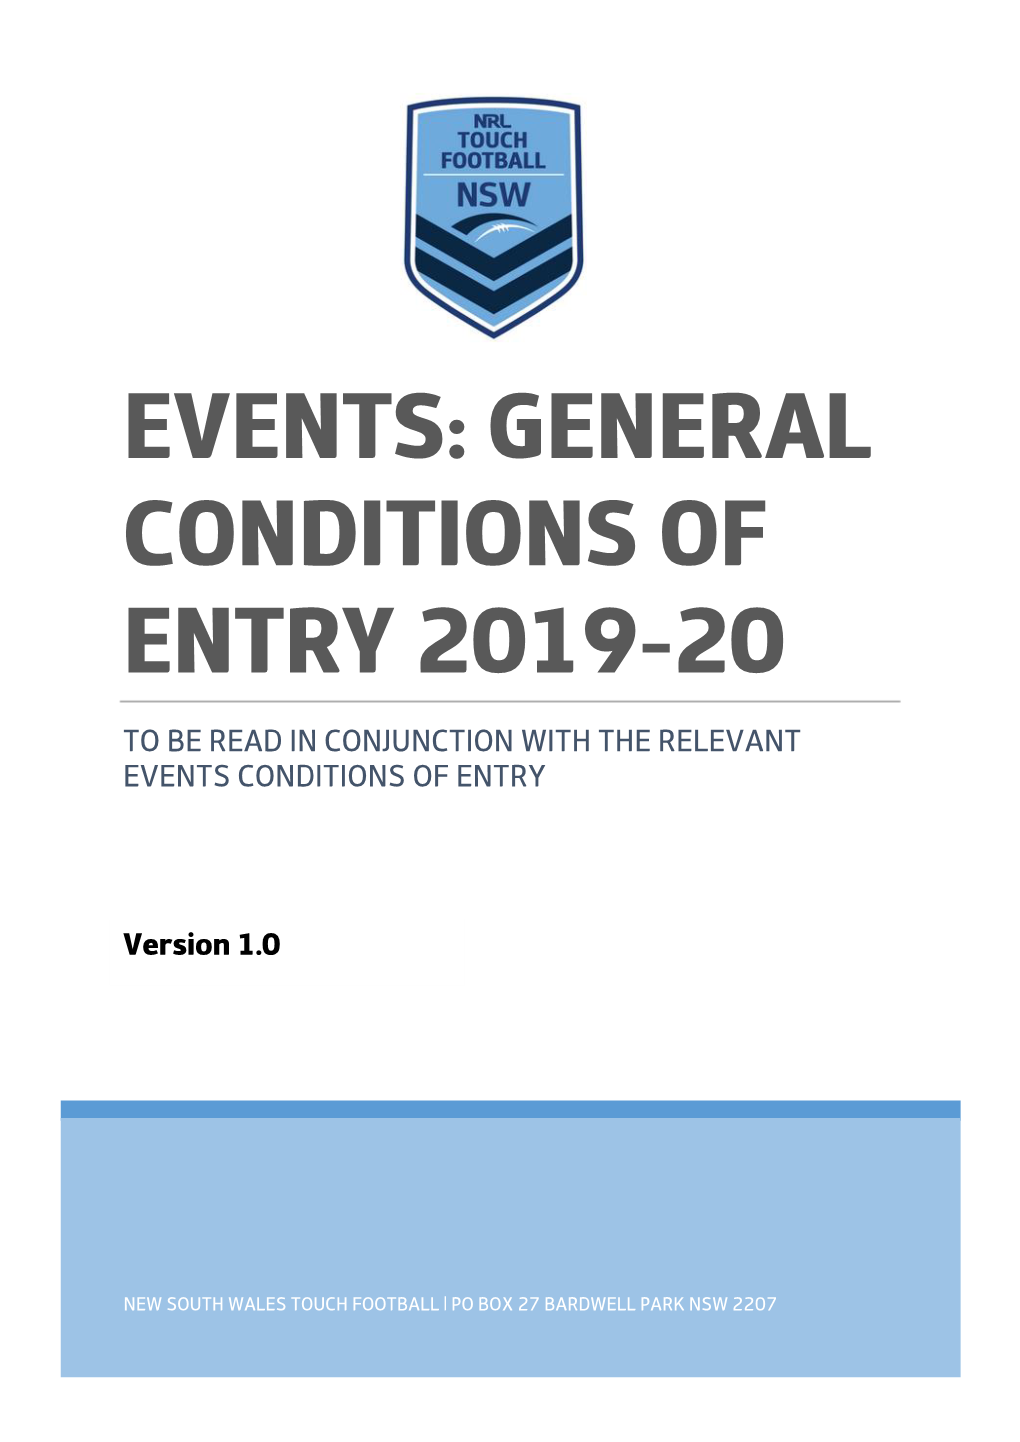 Events: General Conditions of Entry 2019-20